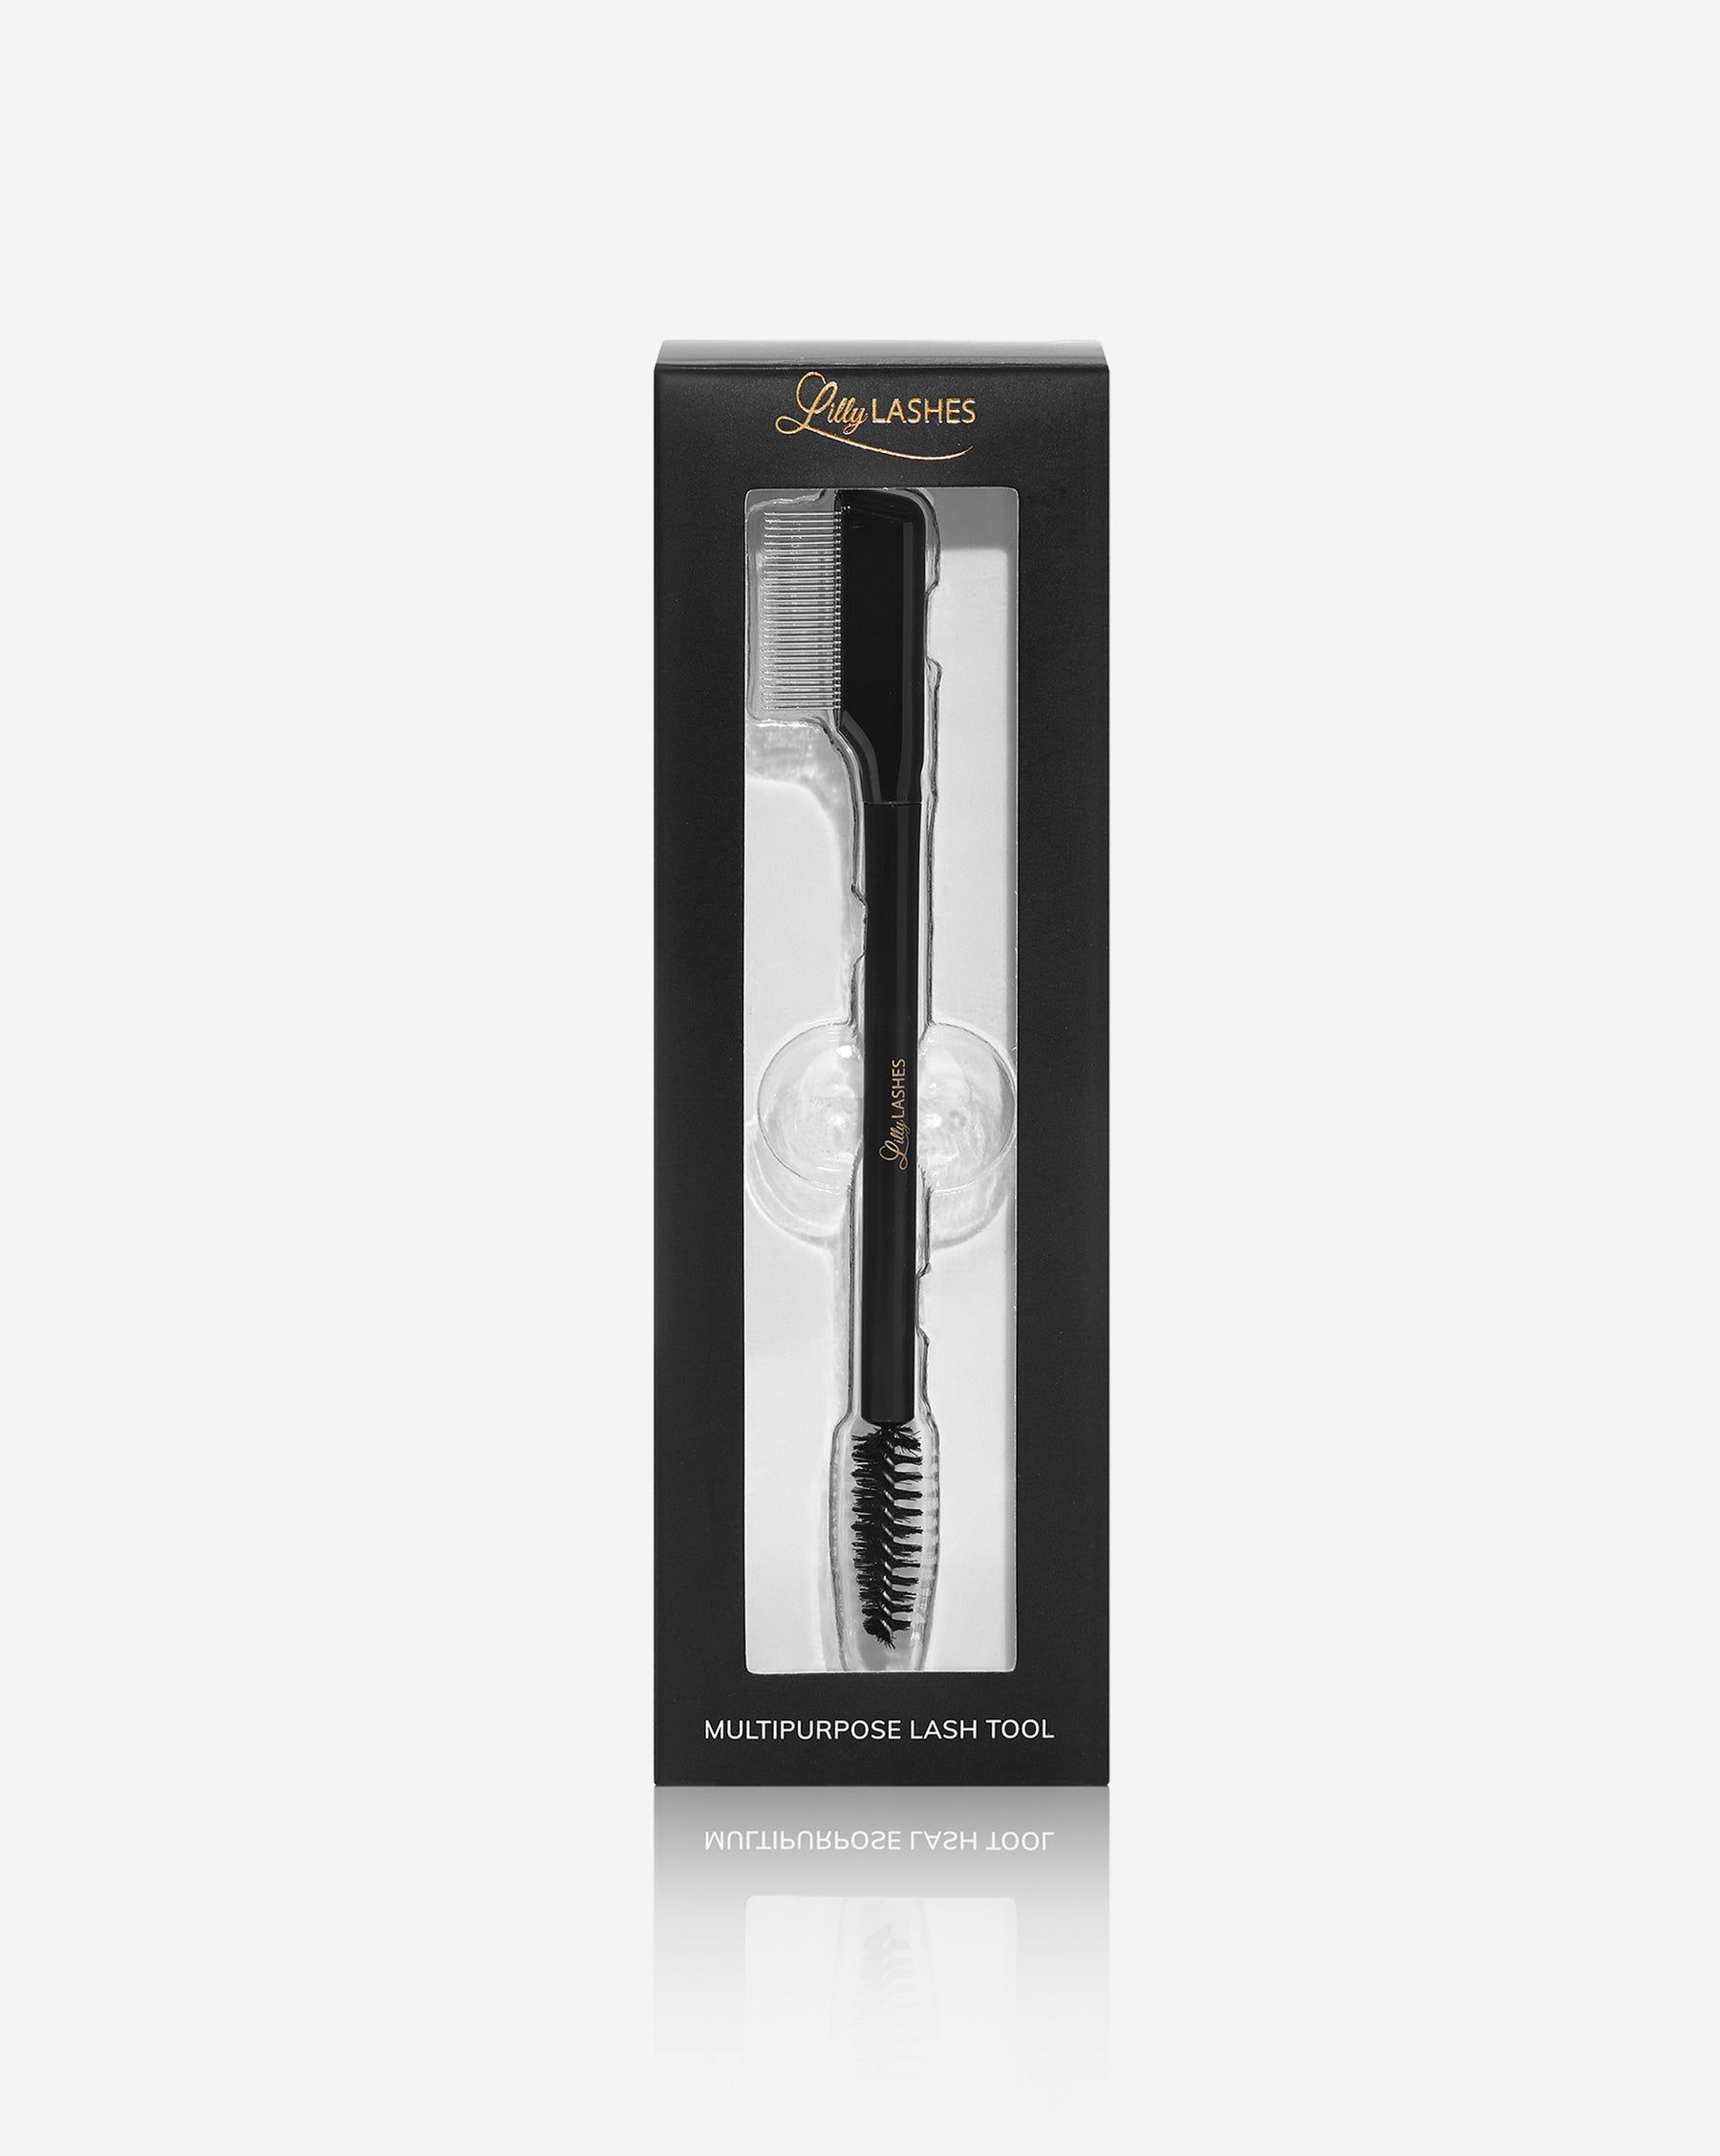 2-in-1 Lash Tool | Lilly Lashes